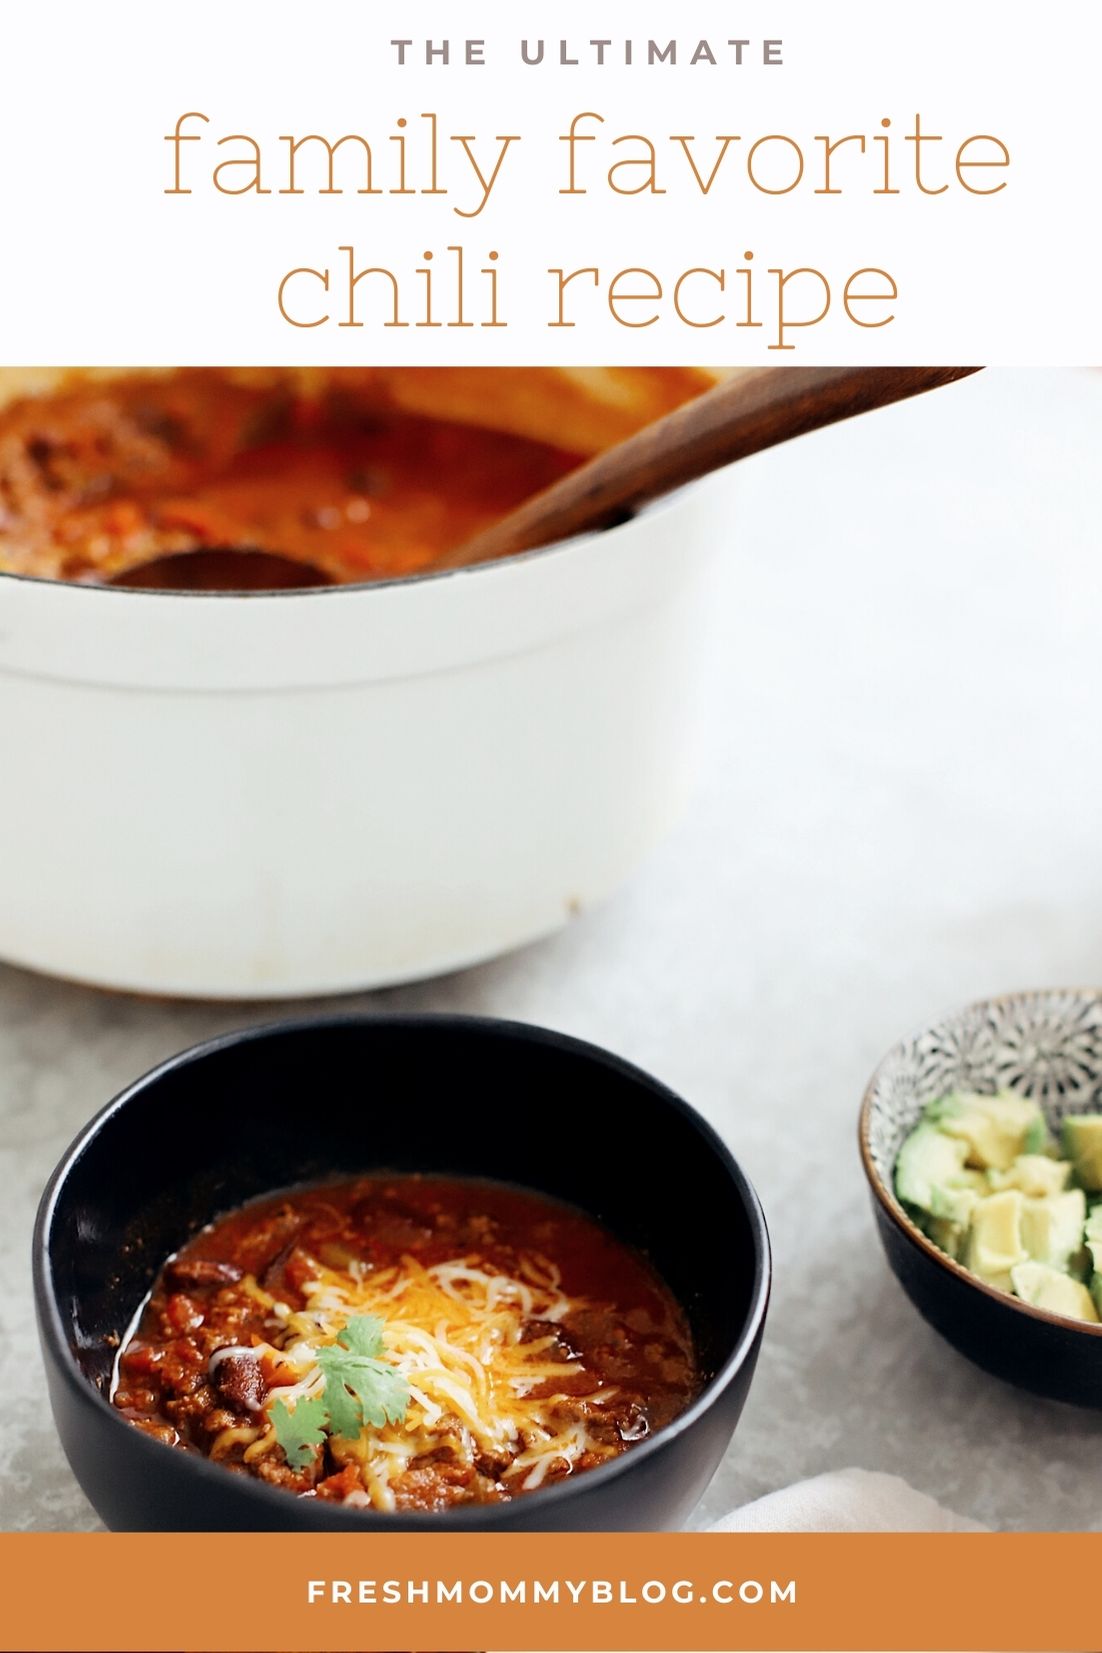 Easy Family Favorite Chili recipe! Make this delicious classic homemade chili in the crockpot or in one pot easily. It's THE BEST CHILI, and my family asks me to make it over and over. | Chili Recipe by popular Florida lifestyle blog, Fresh Mommy Blog: Pinterest of chili in a black ceramic bowl with shredded cheese on top. 